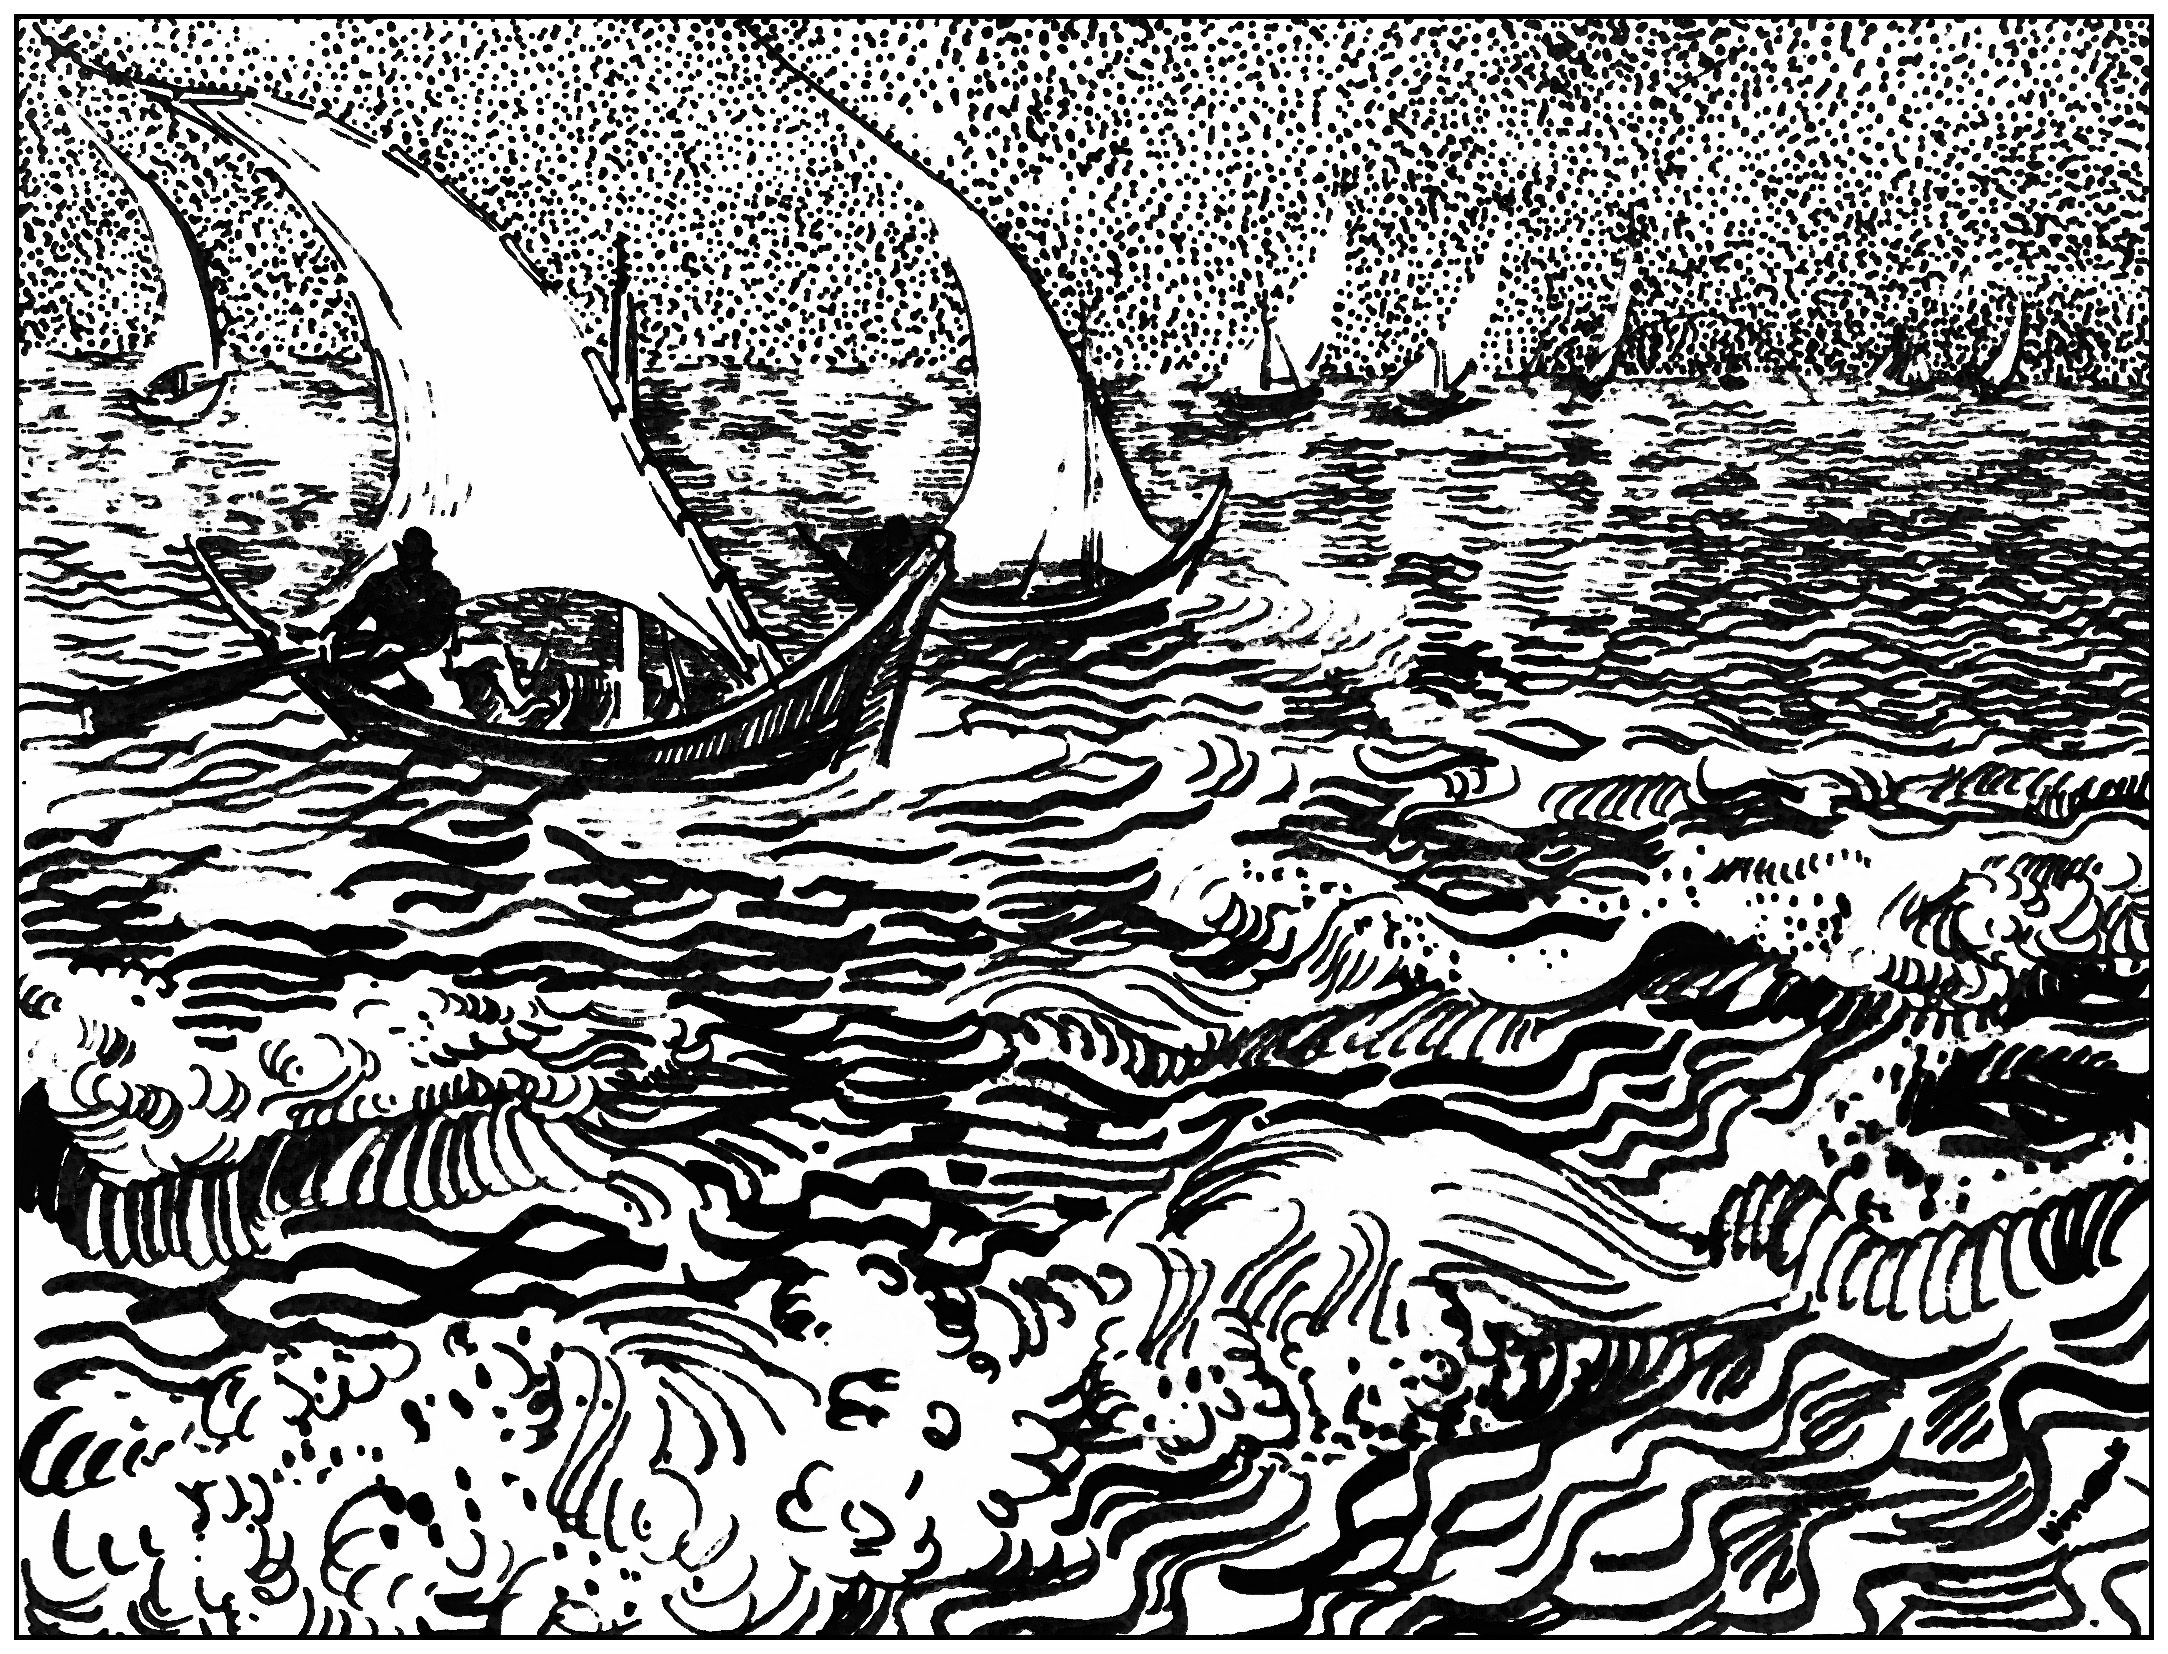 Coloring page for adult created from a Van Gogh drawing : Saintes Marie de la Mer (1888)